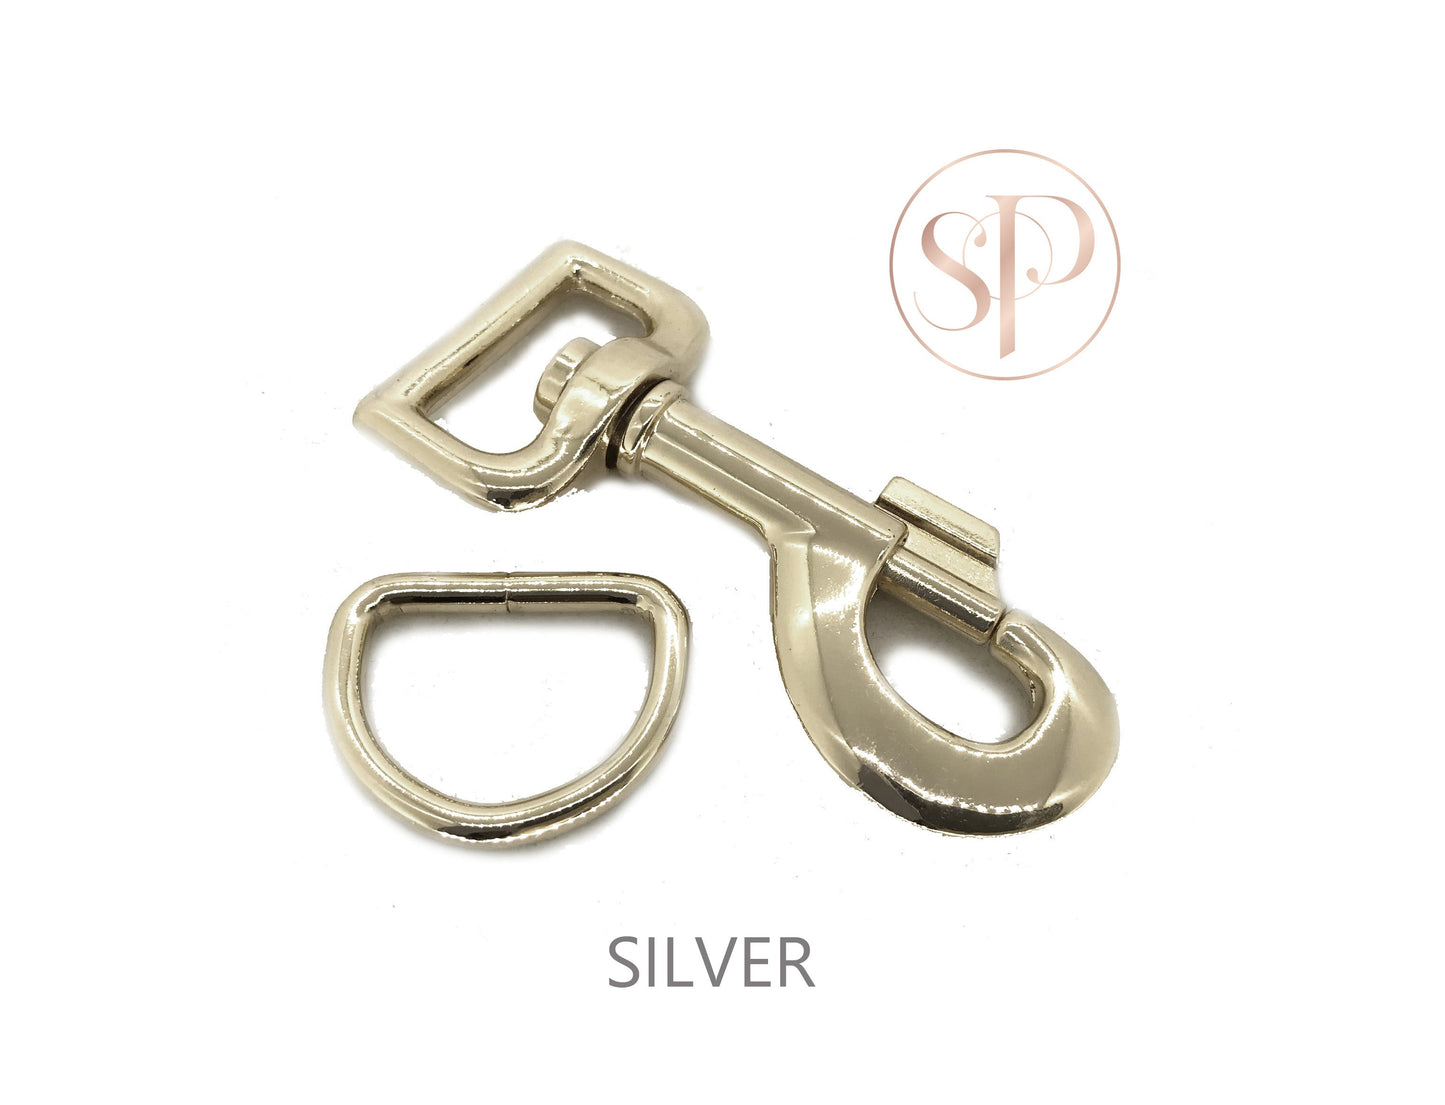 Silver lead clasp and d-ring